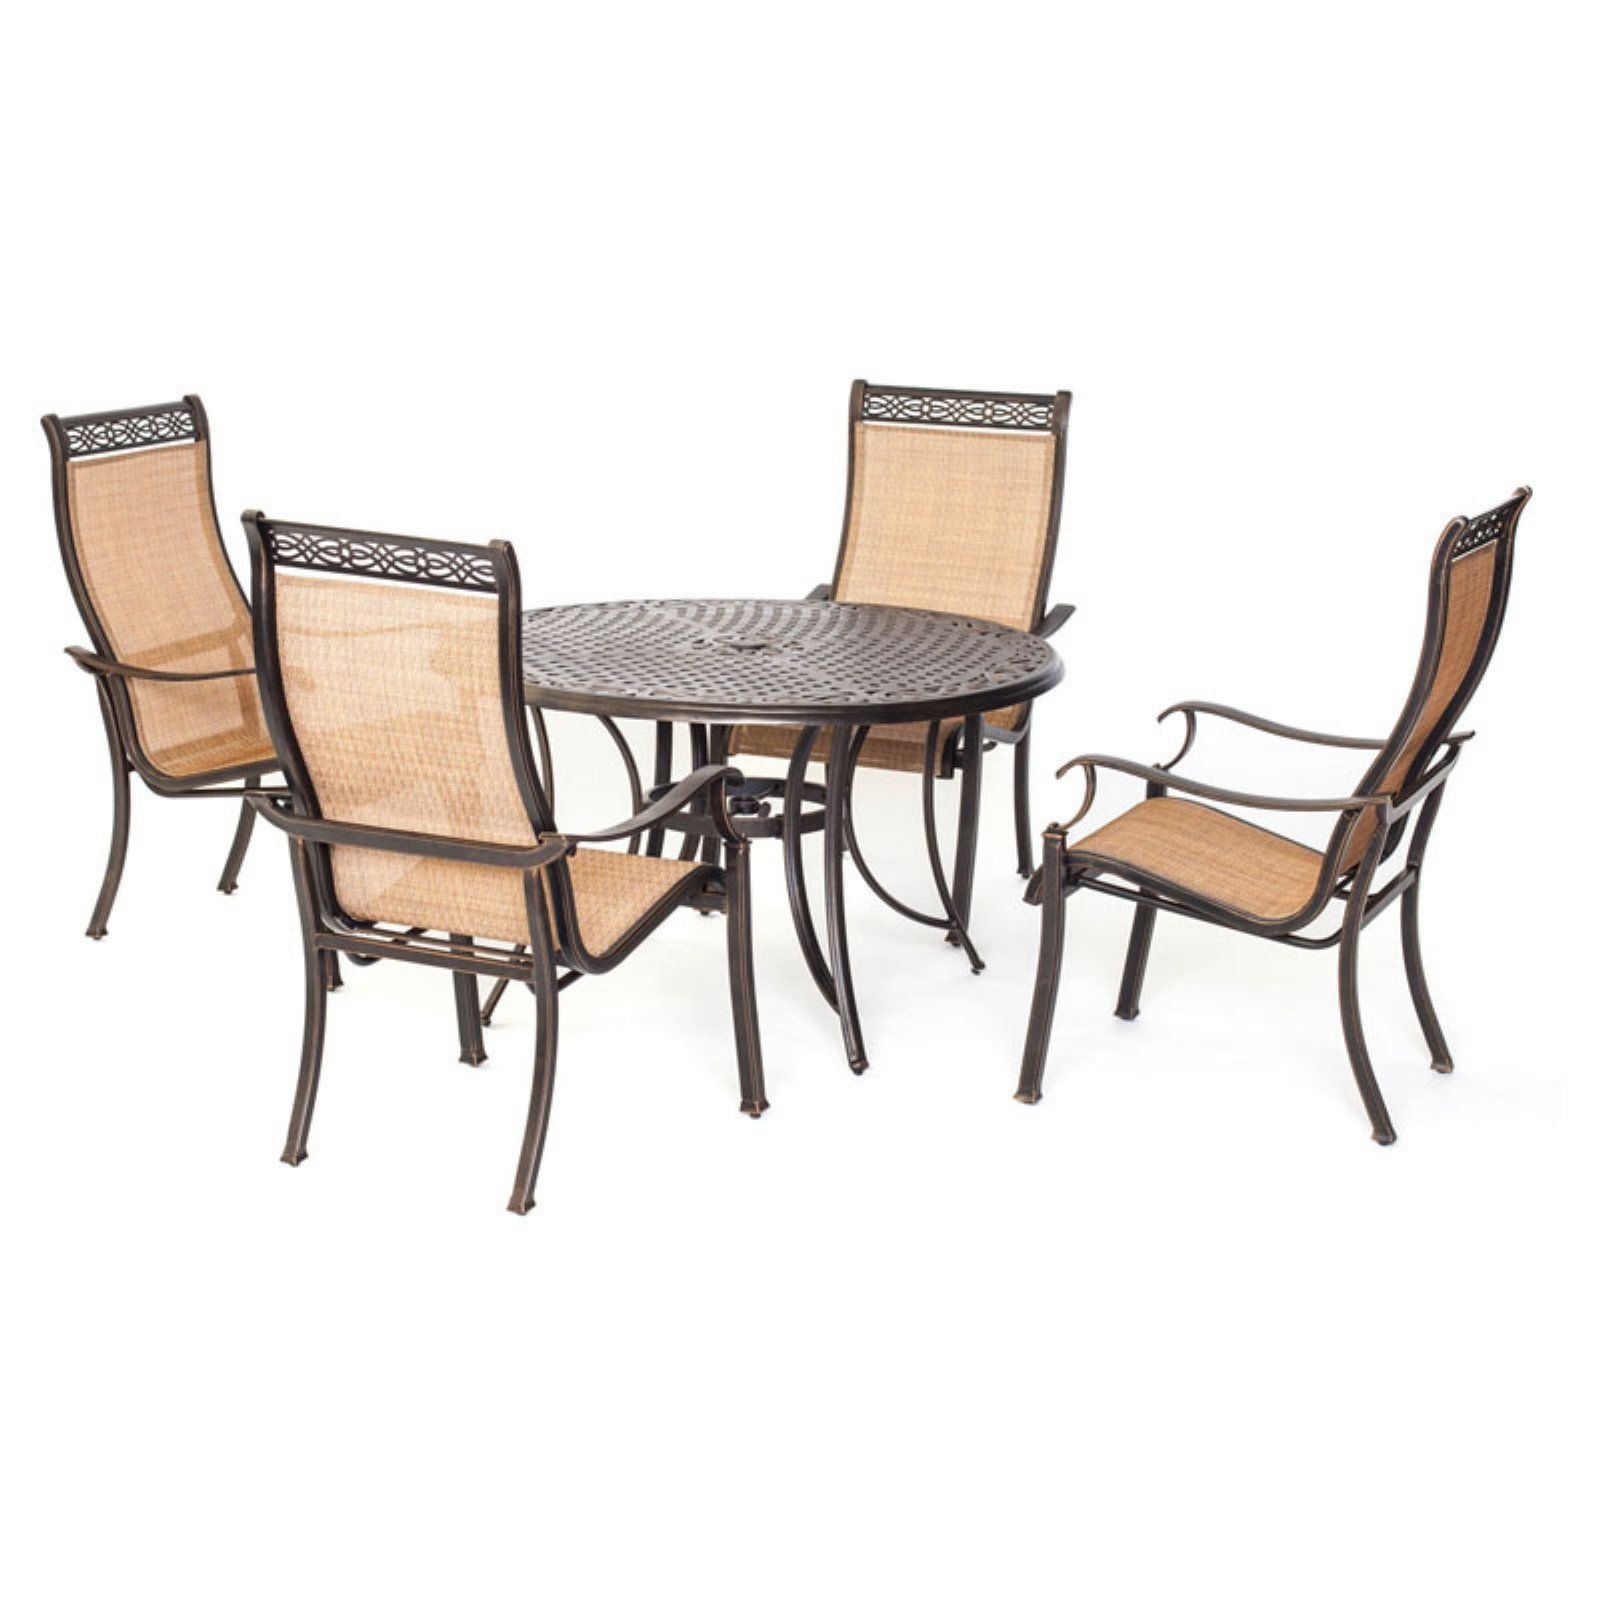 Hanover Manor Aluminum 5 Piece Round Patio Dining Set – Walmart Throughout 2019 Round 5 Piece Outdoor Patio Dining Sets (View 9 of 15)